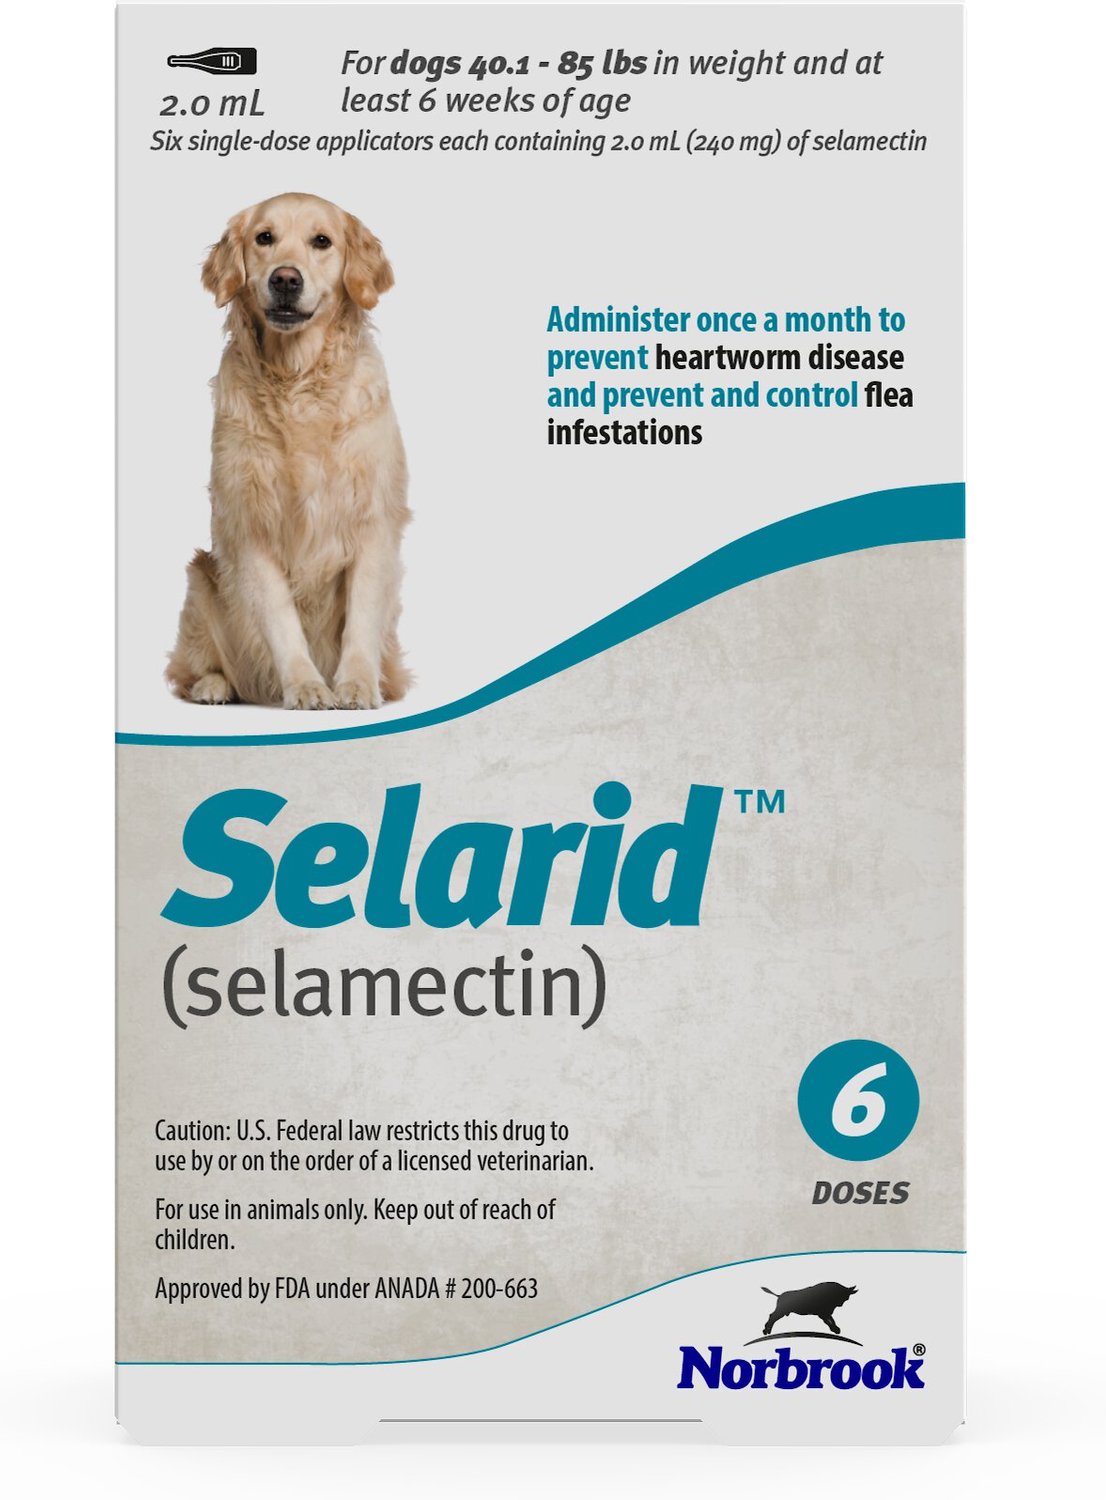 SELARID Topical Solution for Dogs, 40.185 lbs, (Teal Box), 6 Doses (6